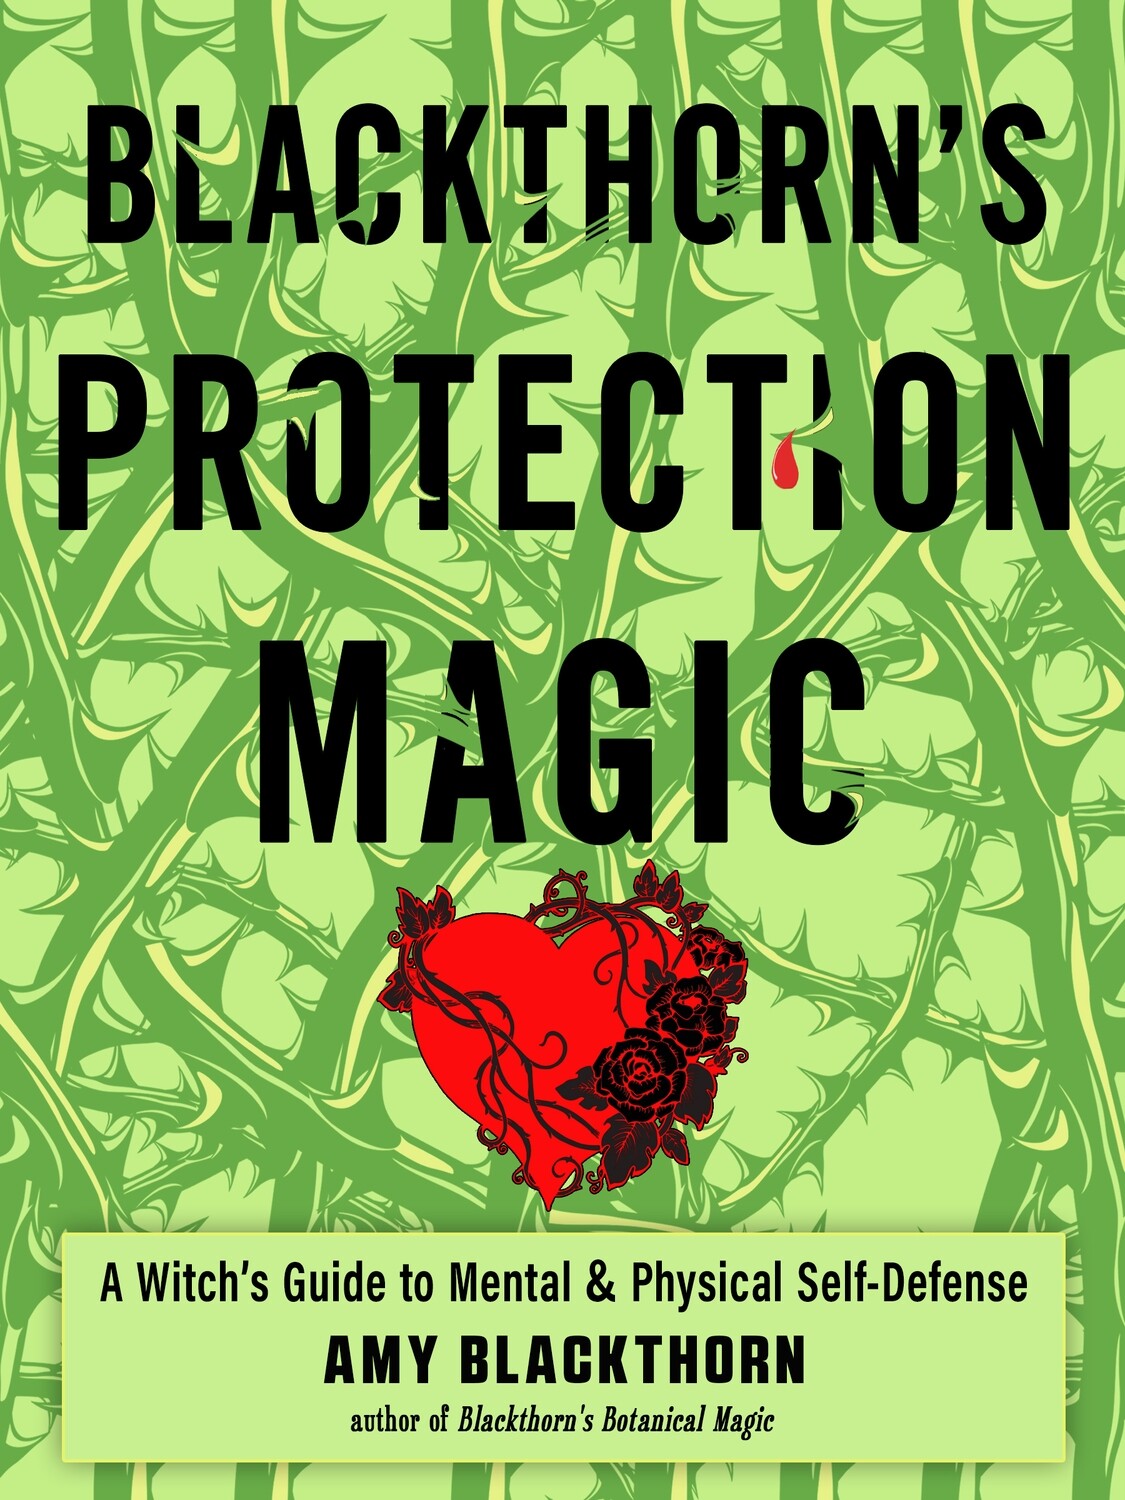 Blackthorn's Protective Magic: A Witch’s Guide to Mental and Physical Self-Defense